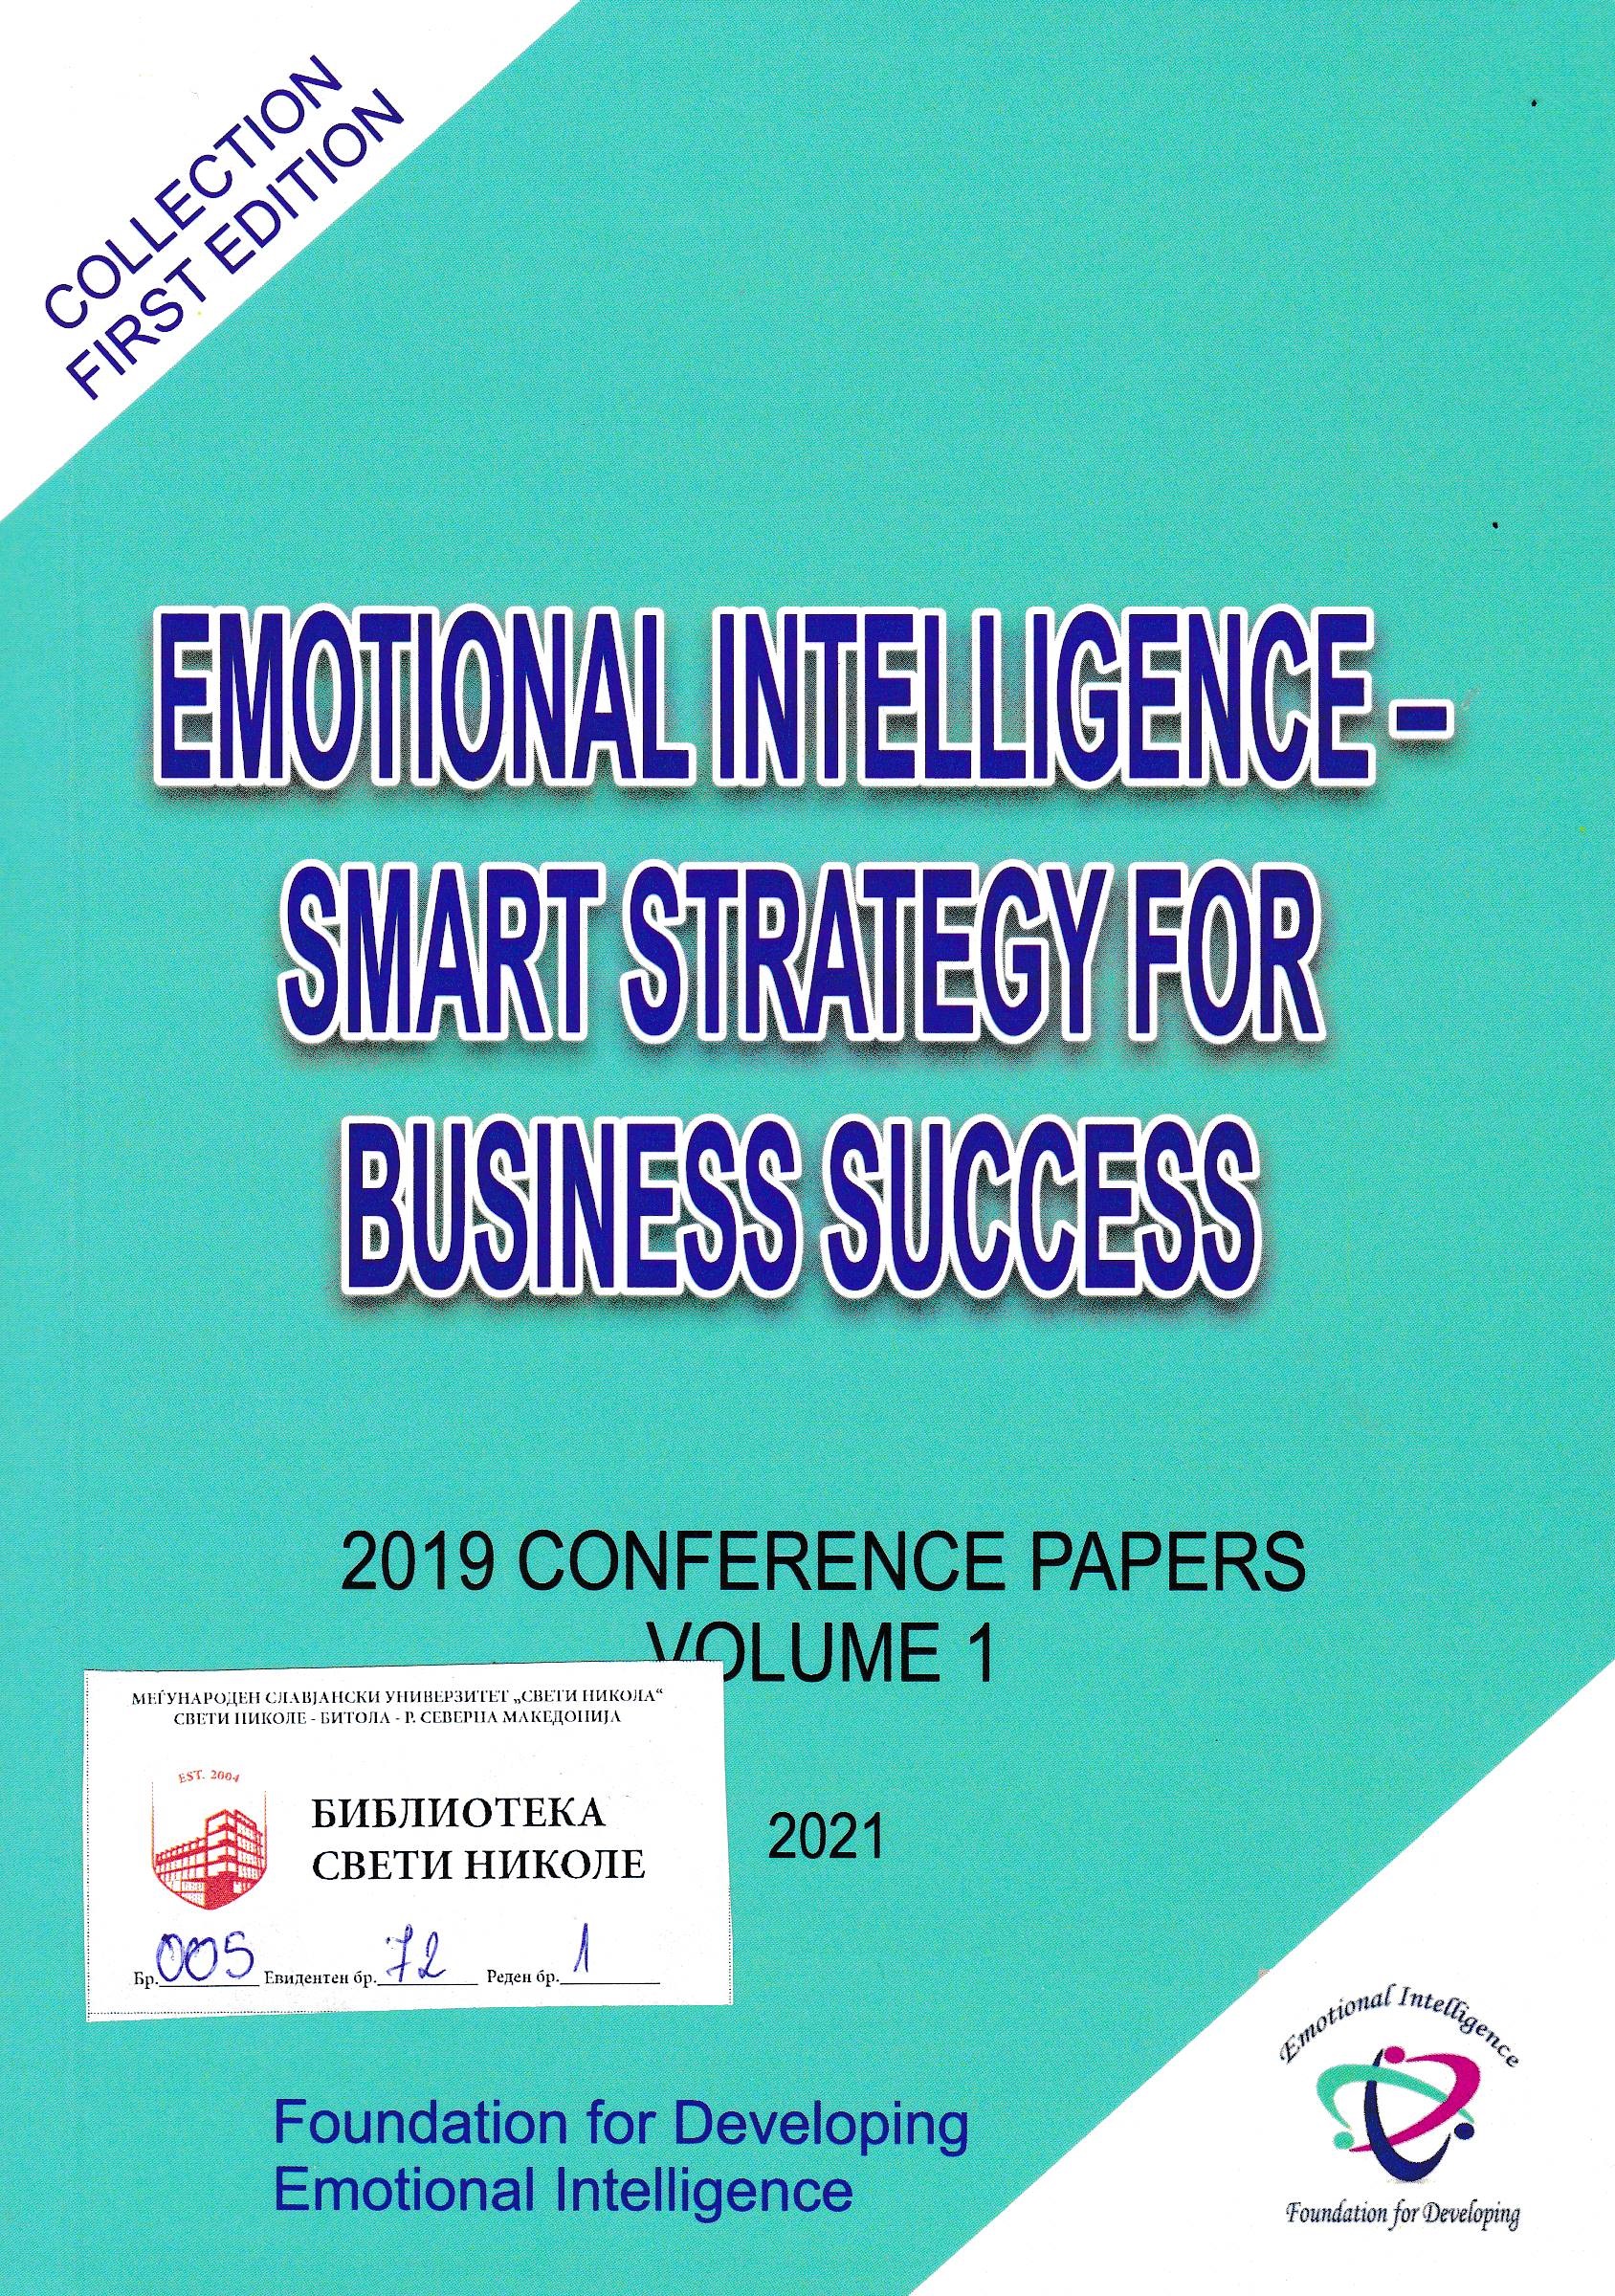 Emotional intelligence - Smart strategy for business success